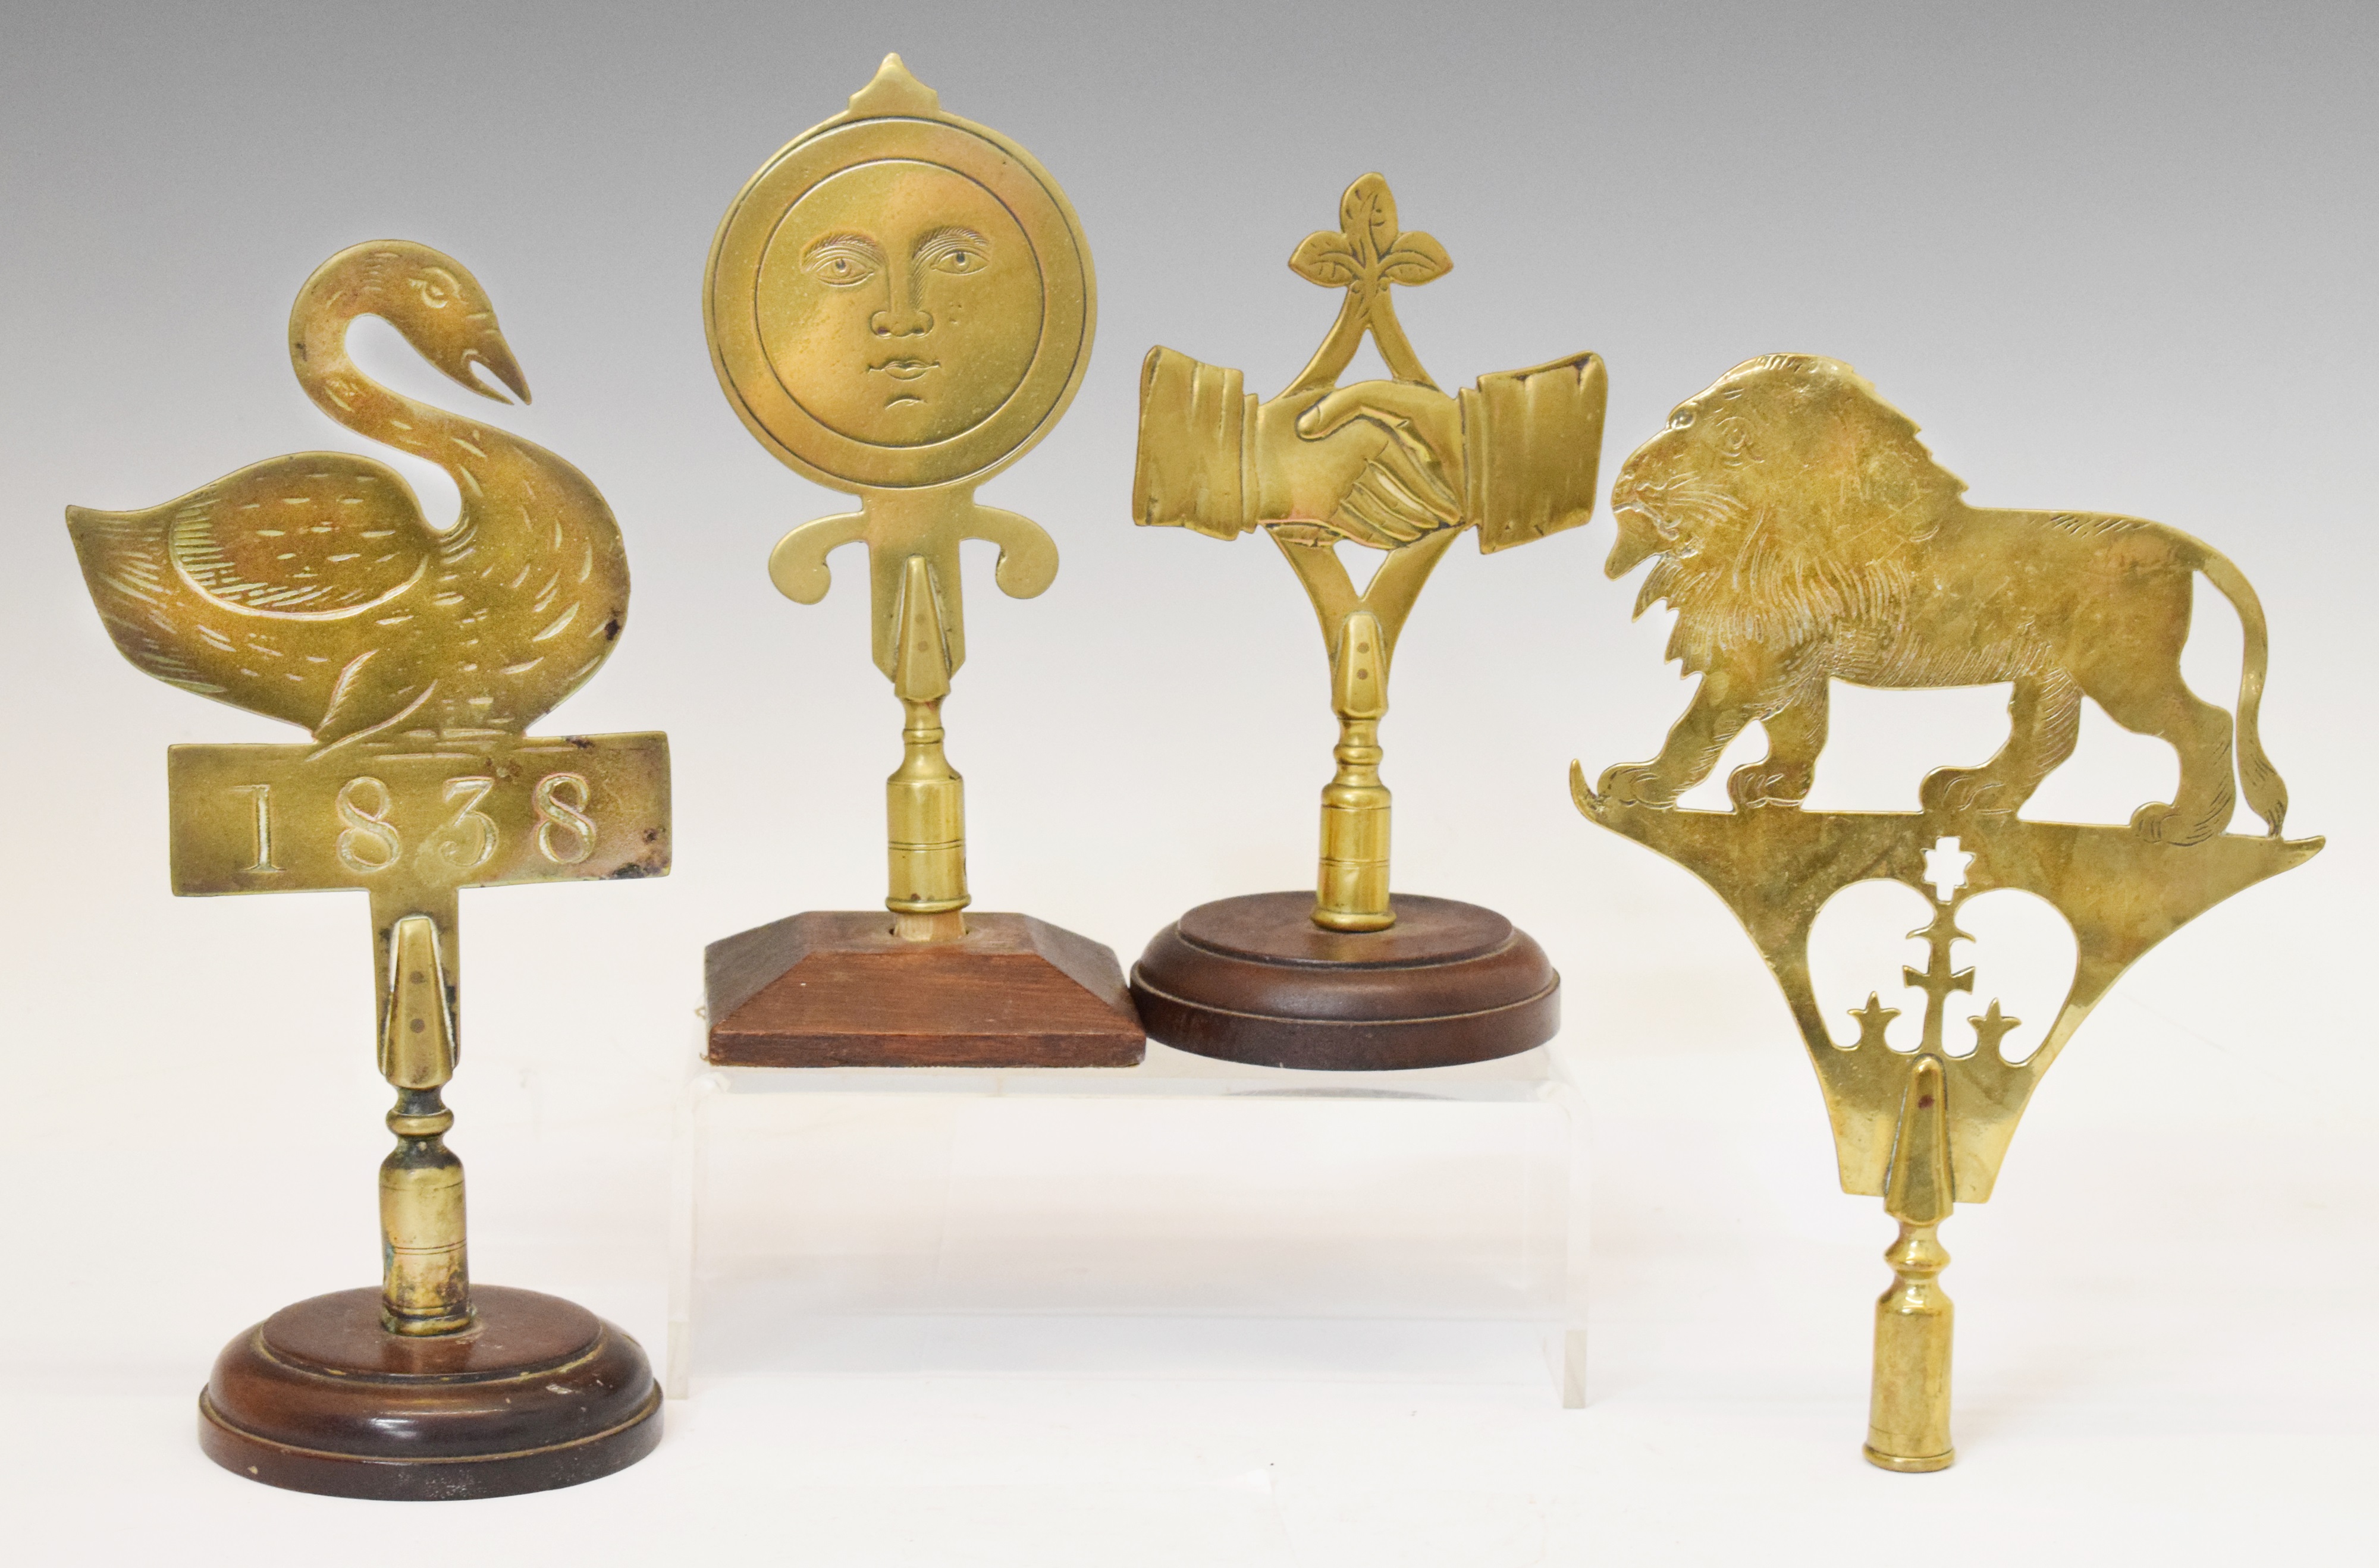 Important collection of Friendly Society brasses to be offered at Clevedon